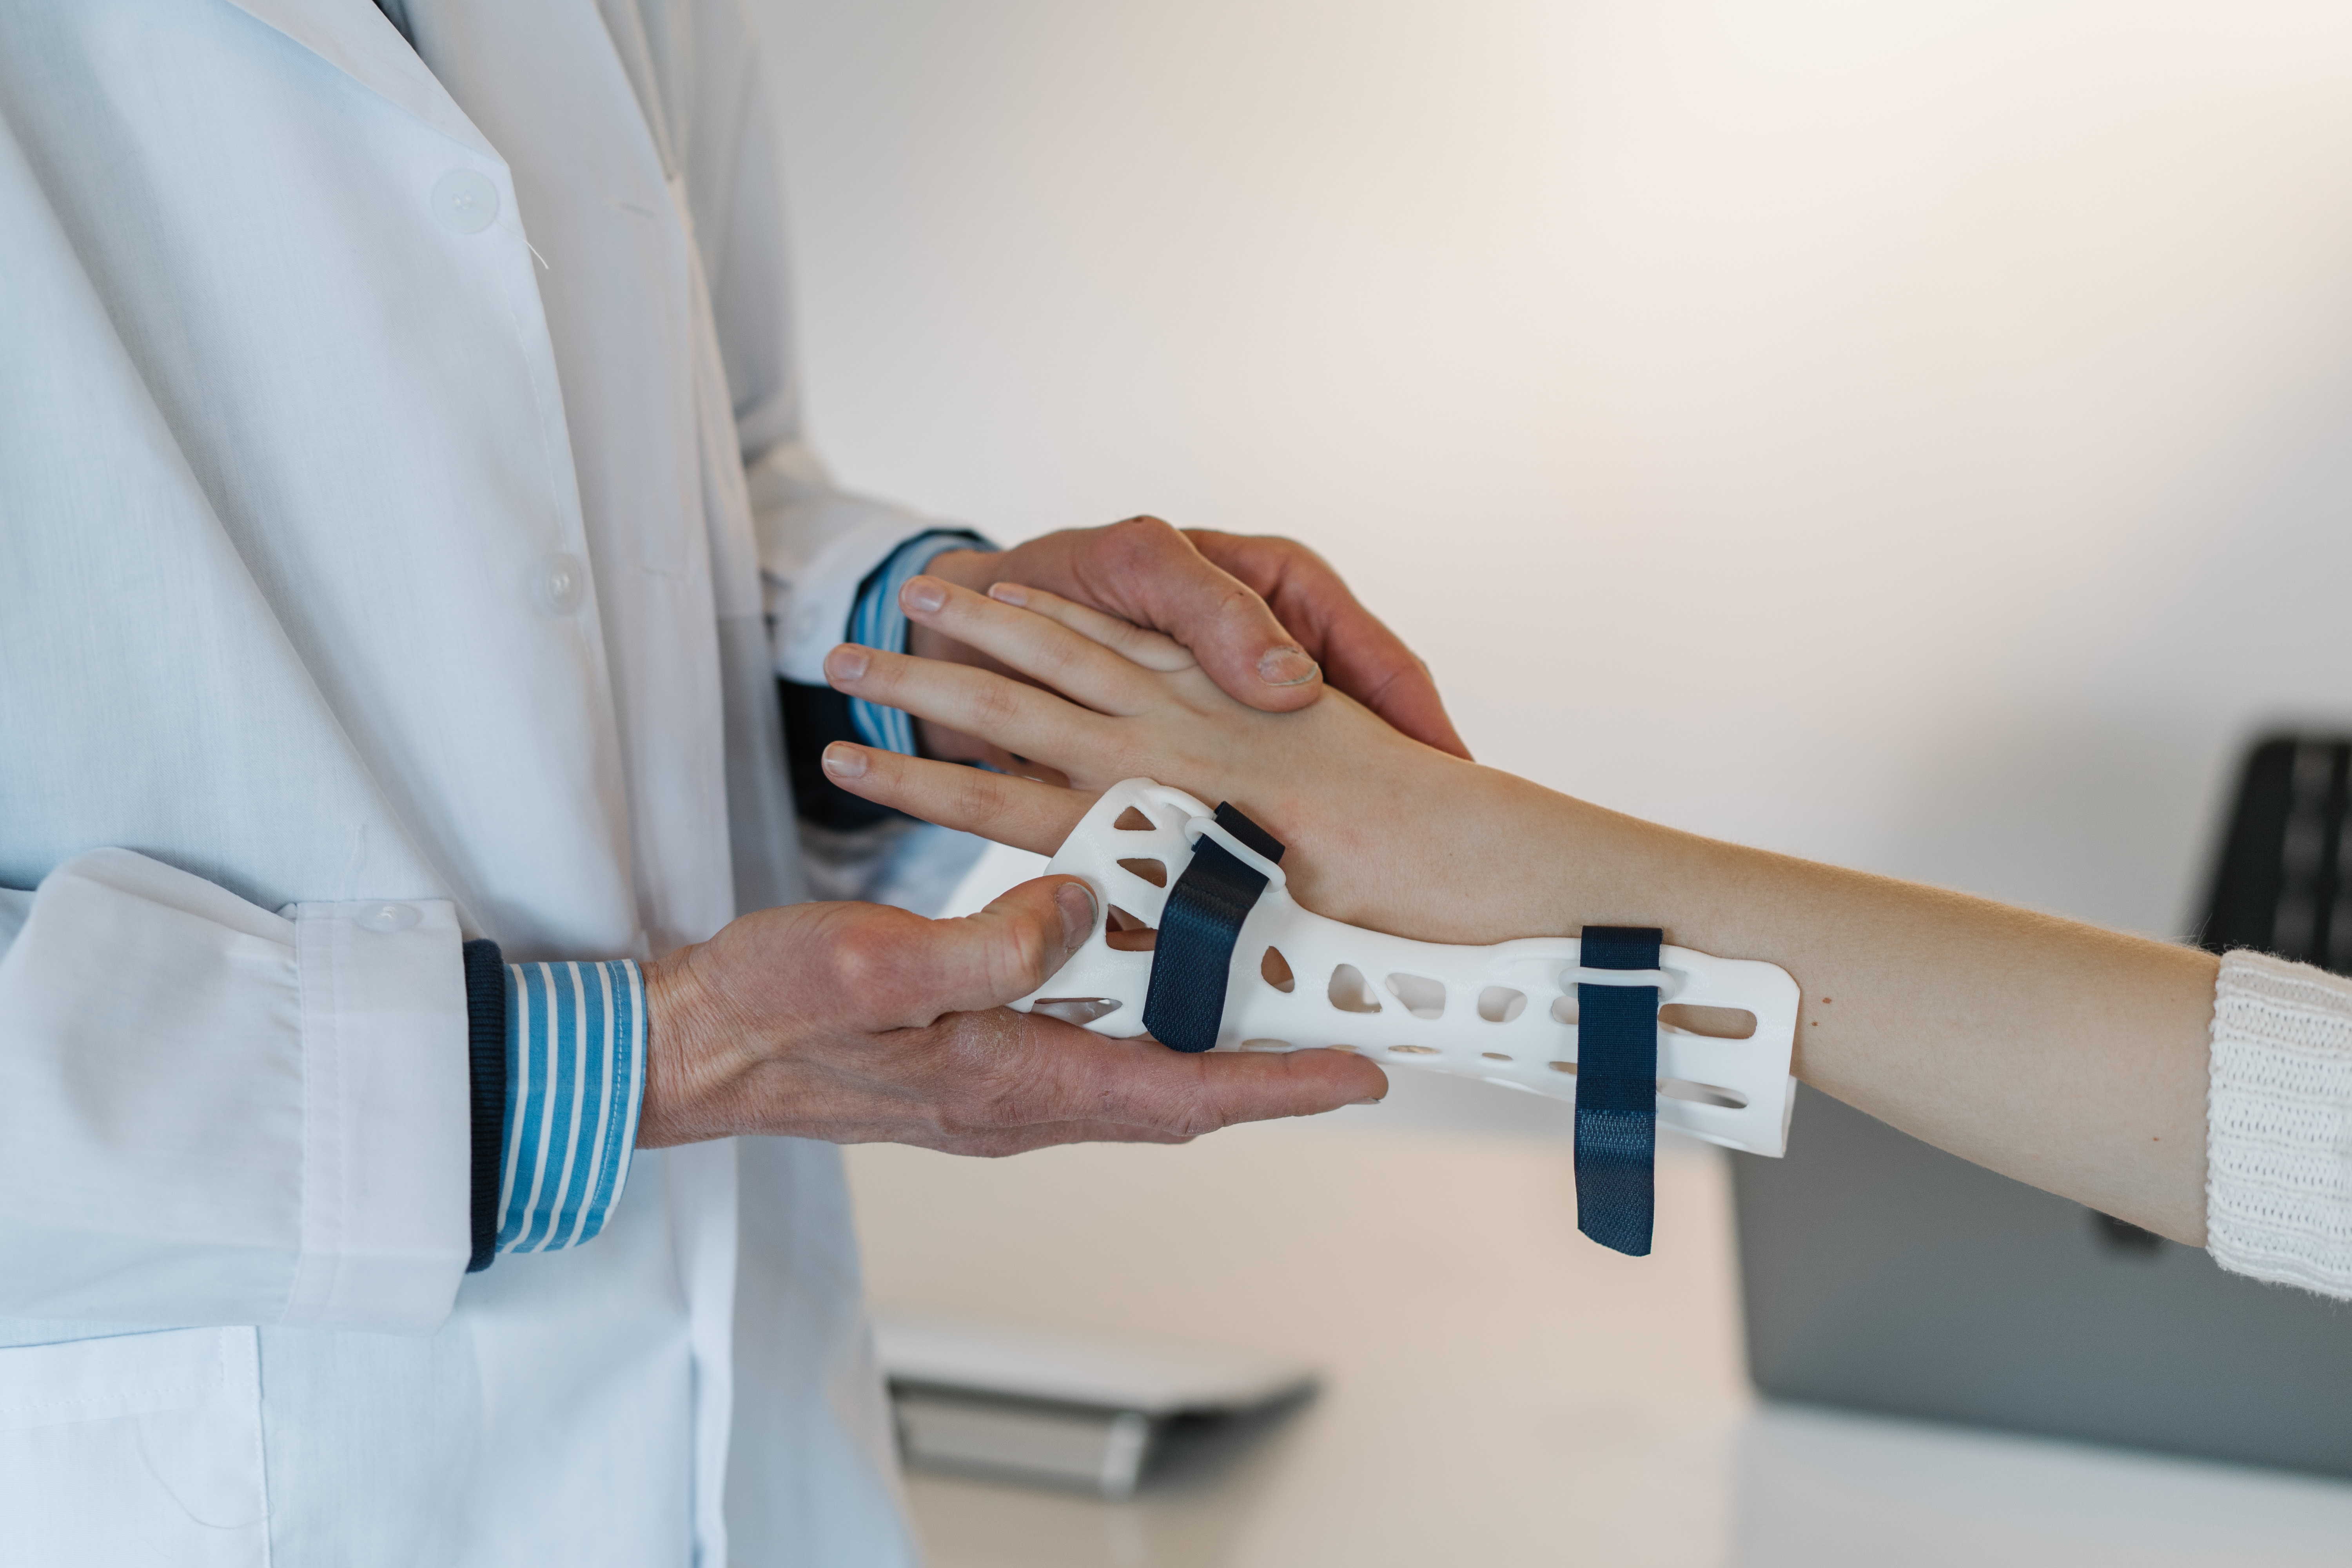 Physical therapy and wrist protection